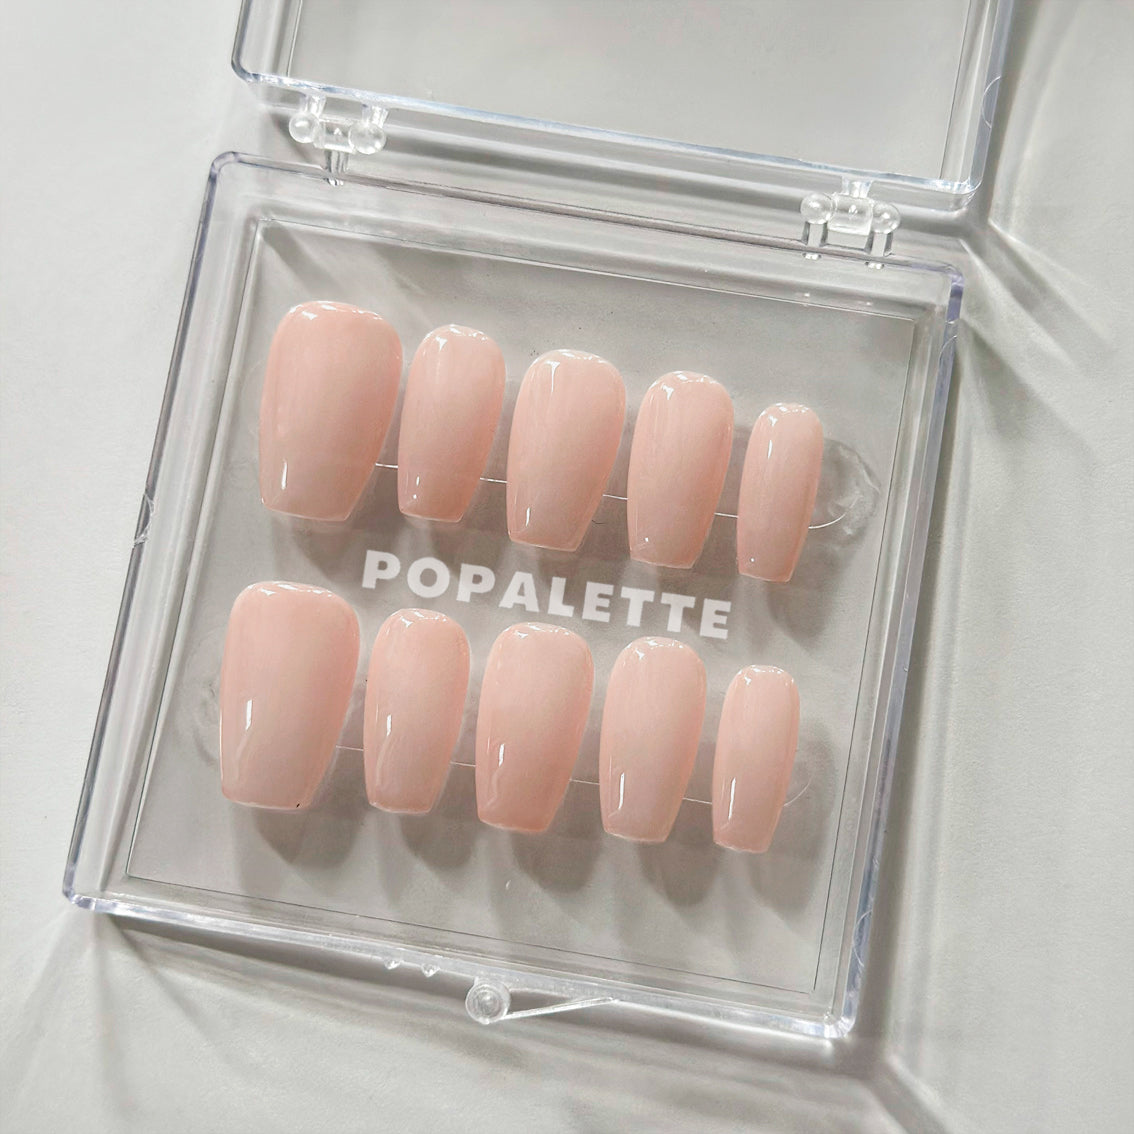 POPALETTE Nude/Neutral Soft Rose Glossy Finish - Handmade Press On Nails